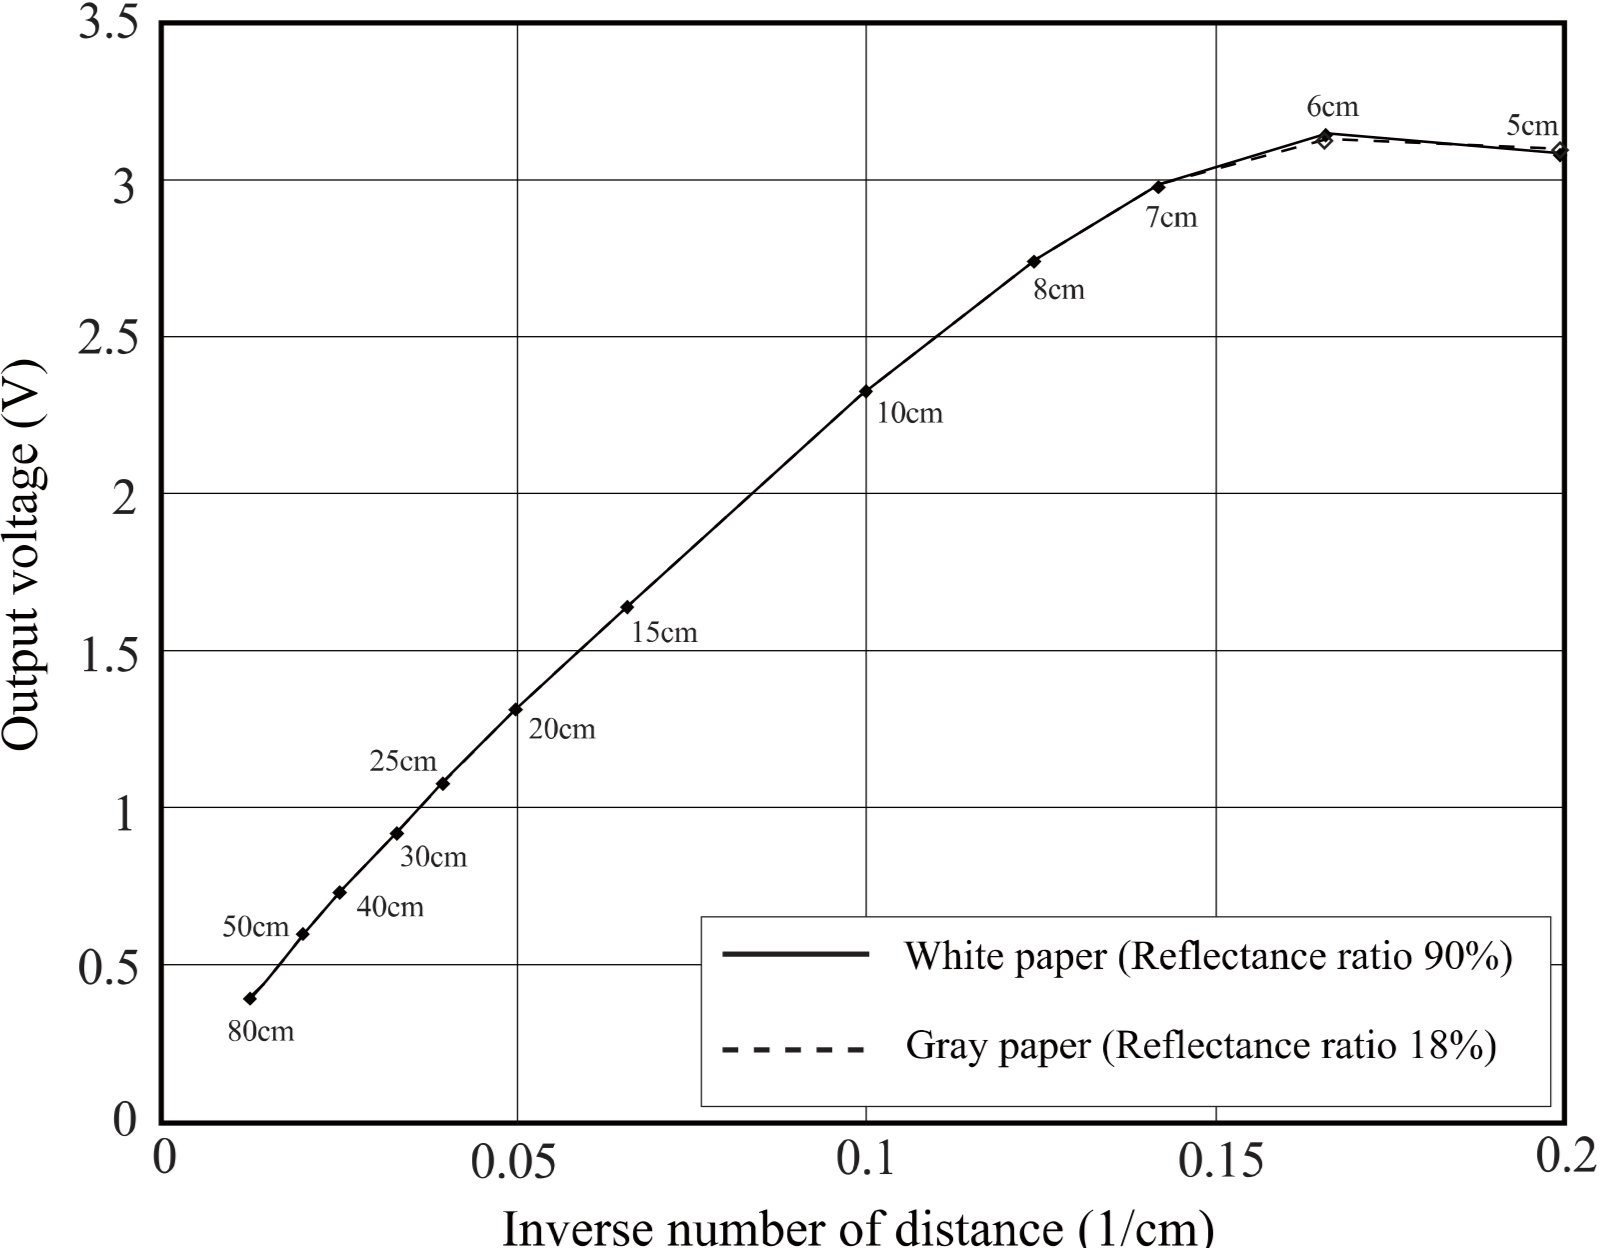 Inverse number of distance